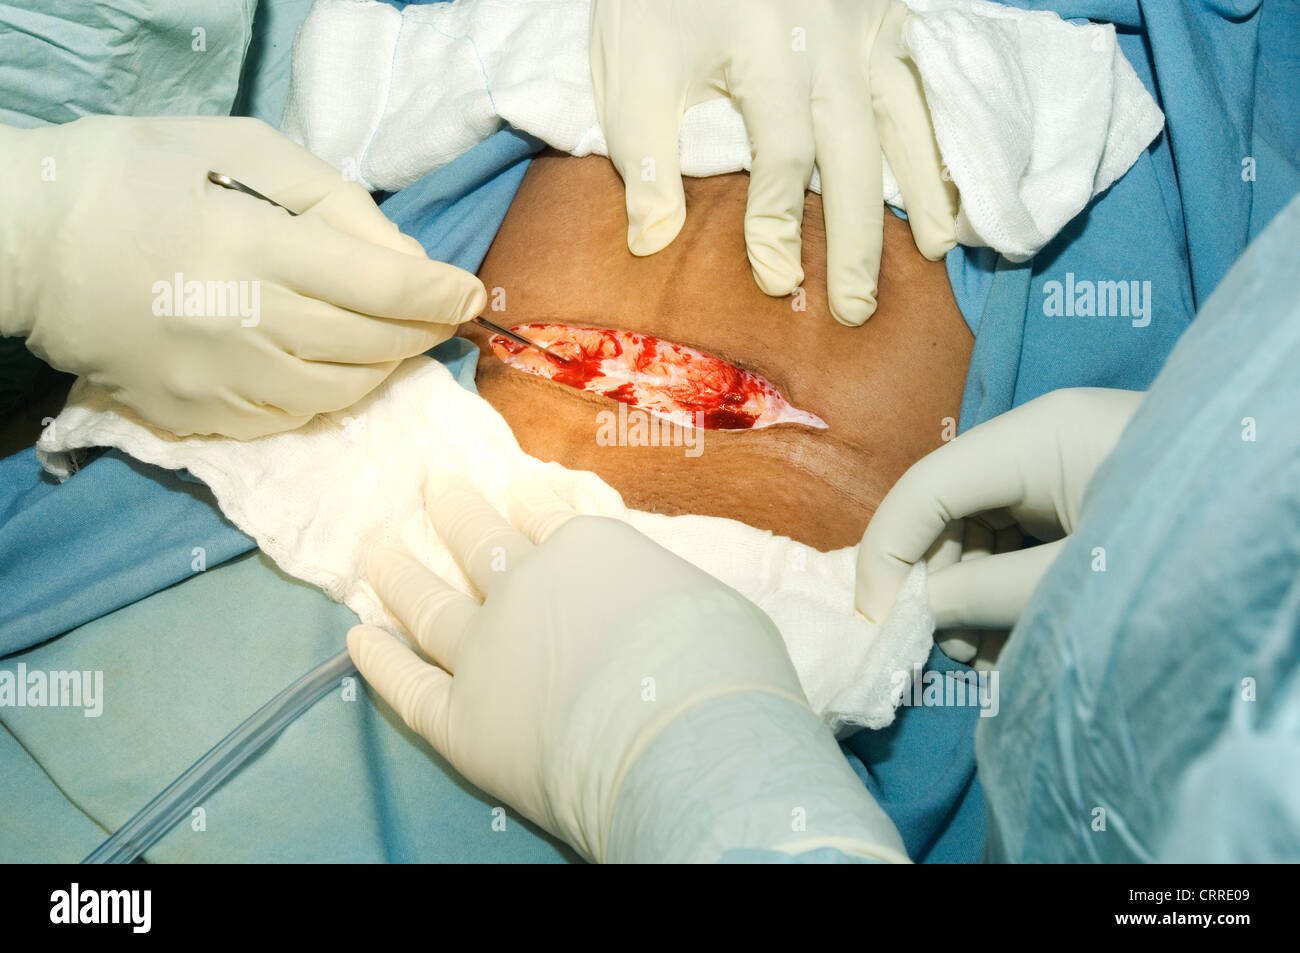 A surgeon uses a scalpel to make the initial incision during a Caesarean delivery. Stock Photo